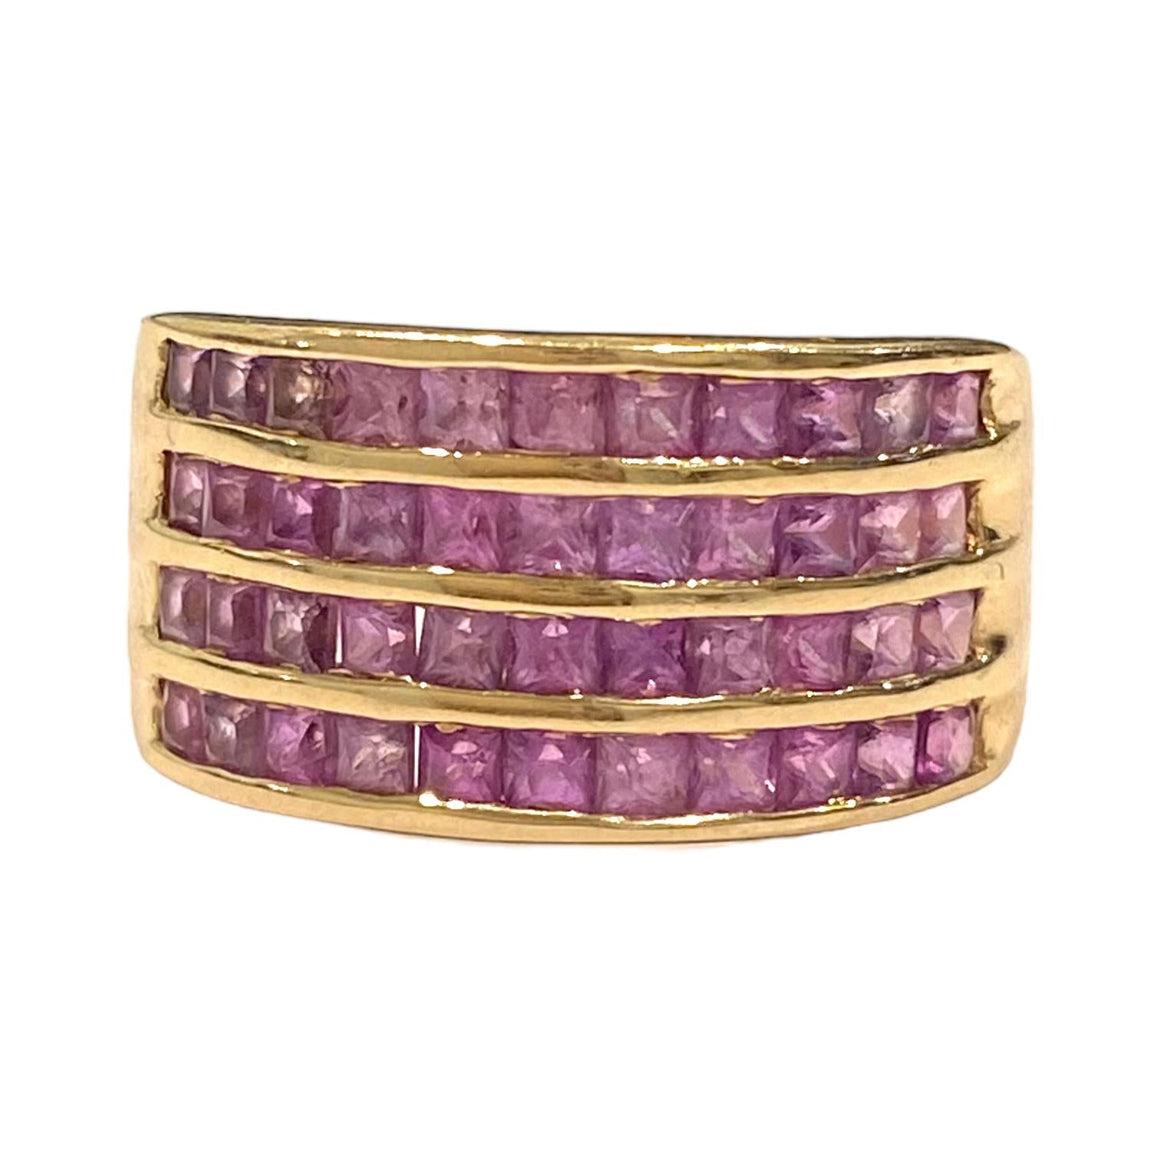 Vintage 14K Yellow Gold Wide Pink Sapphire Band Ring